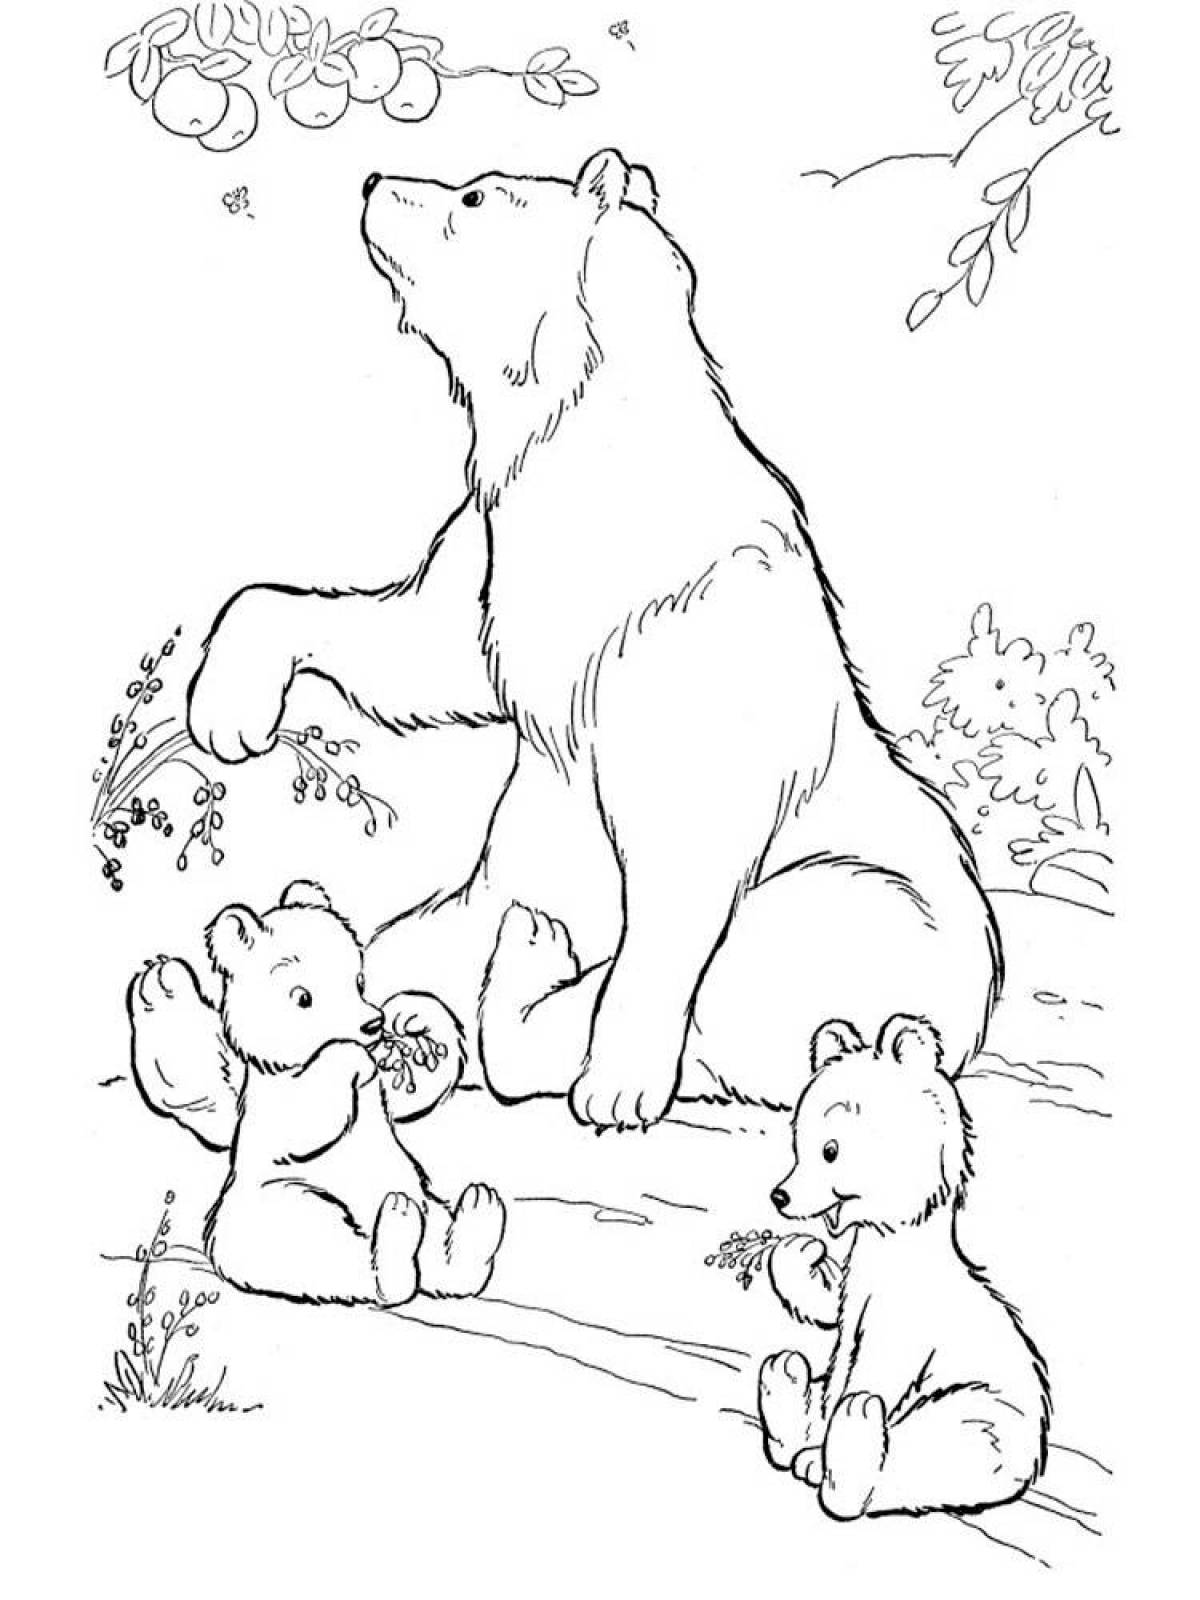 Joyful bear coloring pages for kids